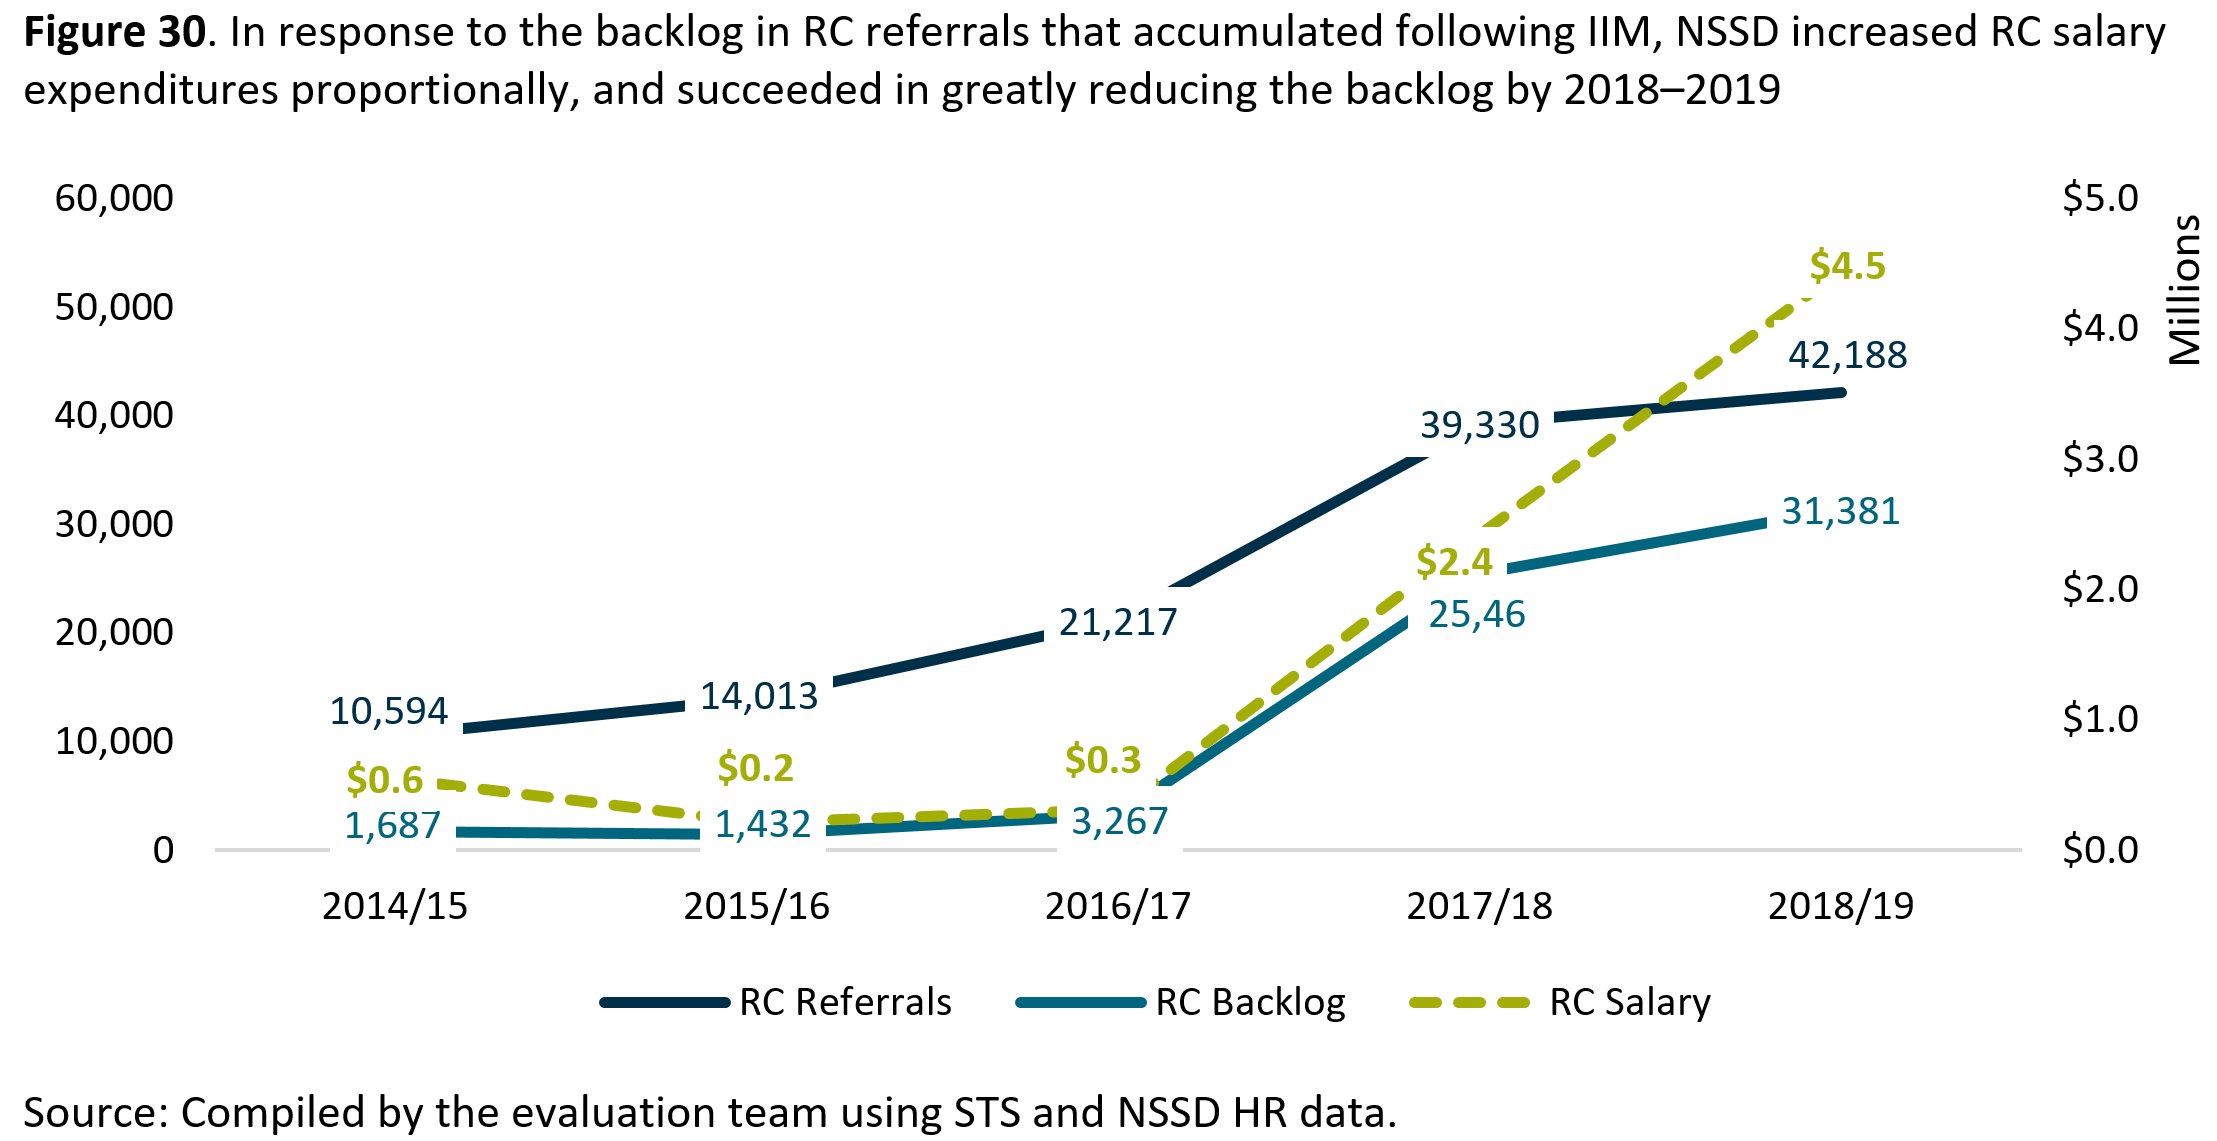 Figure 30. In response to the backlog in <abbr>RC</abbr> referrals that accumulated following <abbr>IIM</abbr>, <abbr>NSSD</abbr> increased <abbr>RC</abbr> salary expenditures proportionally, and succeeded in greatly reducing the backlog by 2018 to 2019